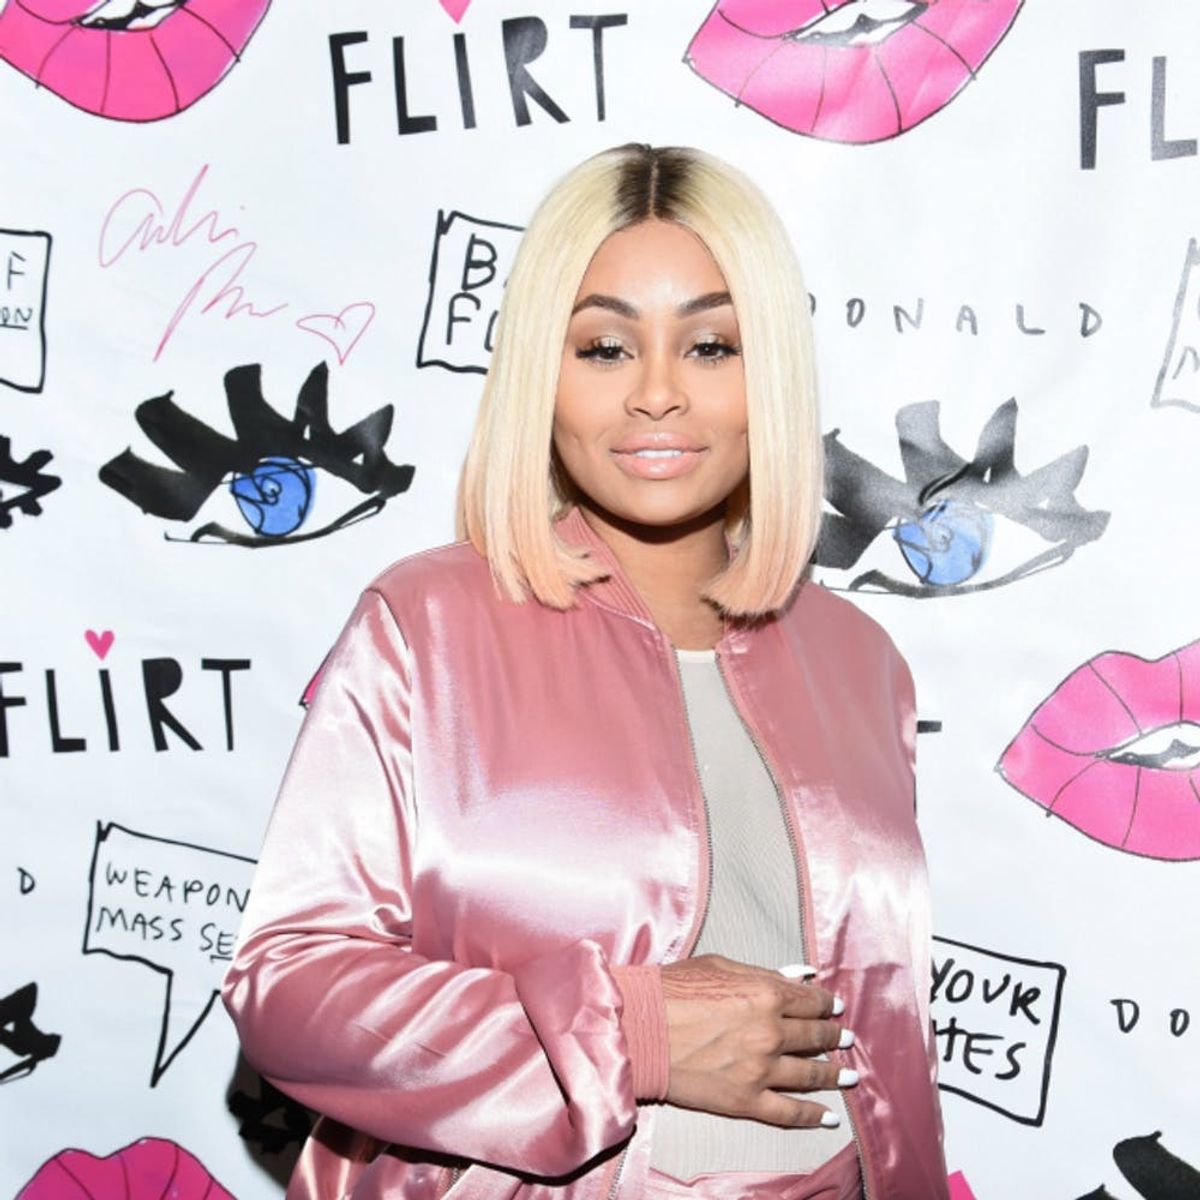 Is Blac Chyna Overdoing Social Media Sharing of Baby Dream?